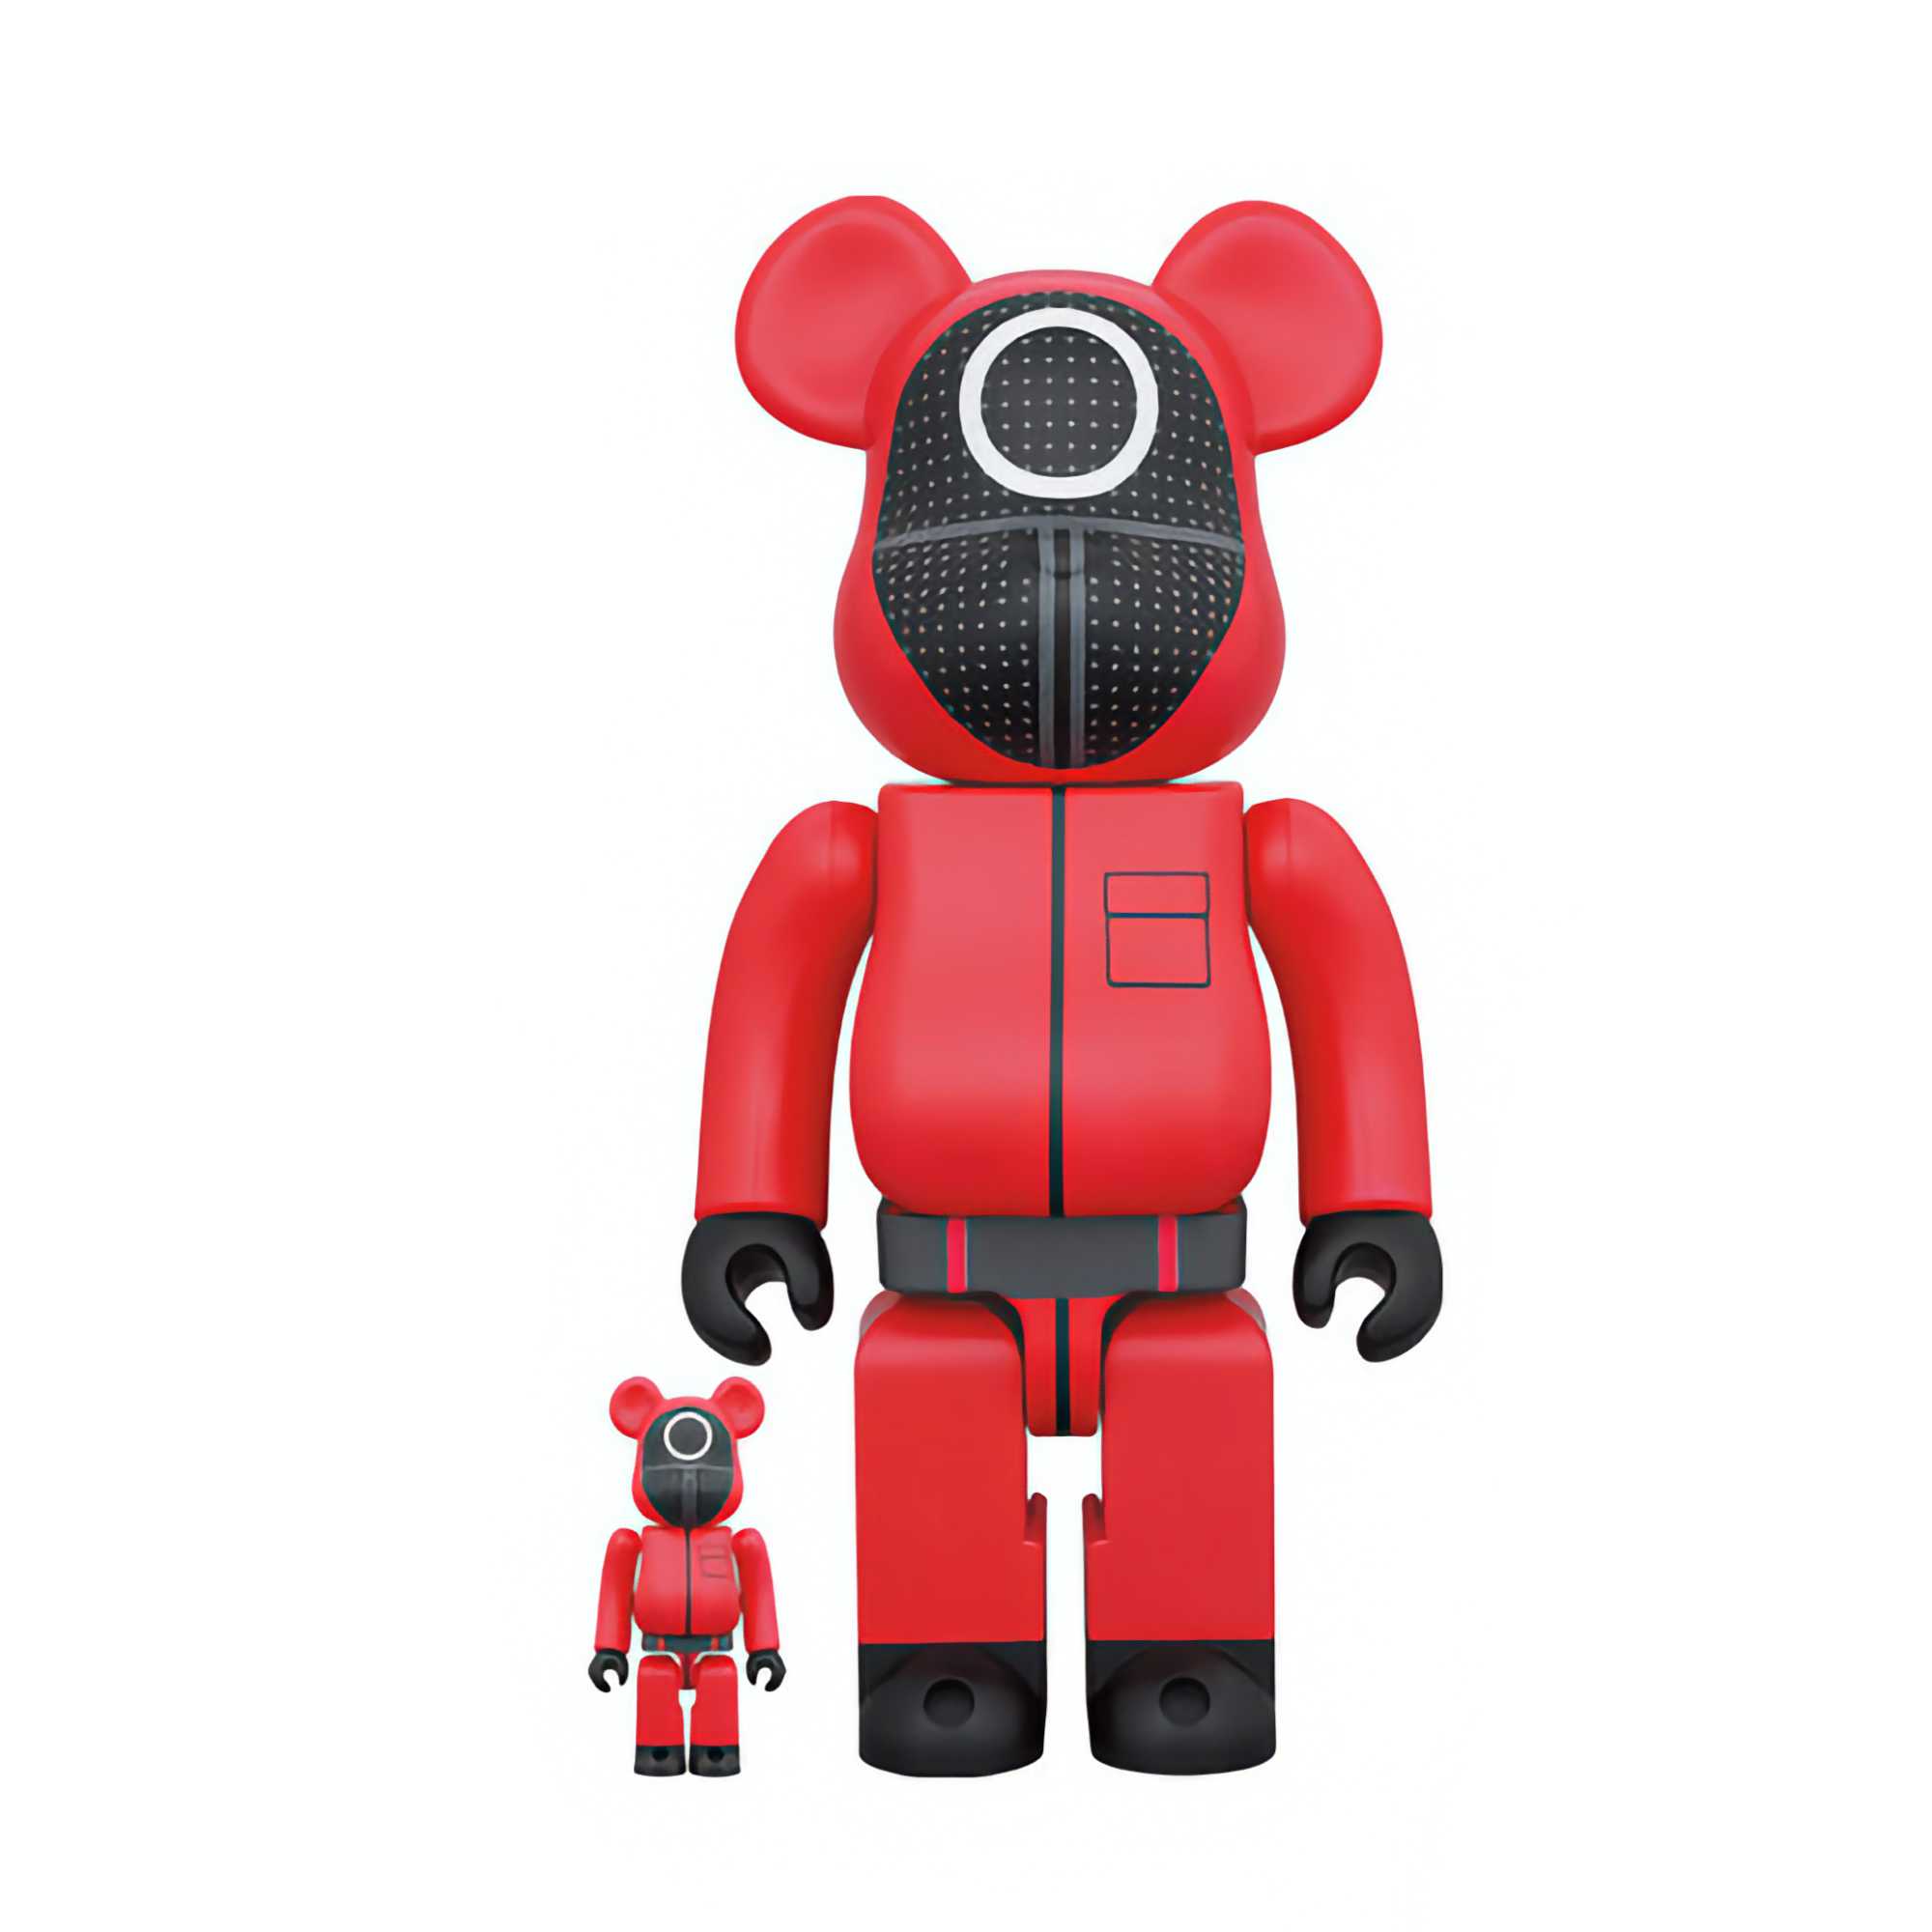 BE@RBRICK SQUID GAME(Squid game) GUARD "○" 100% & 400%